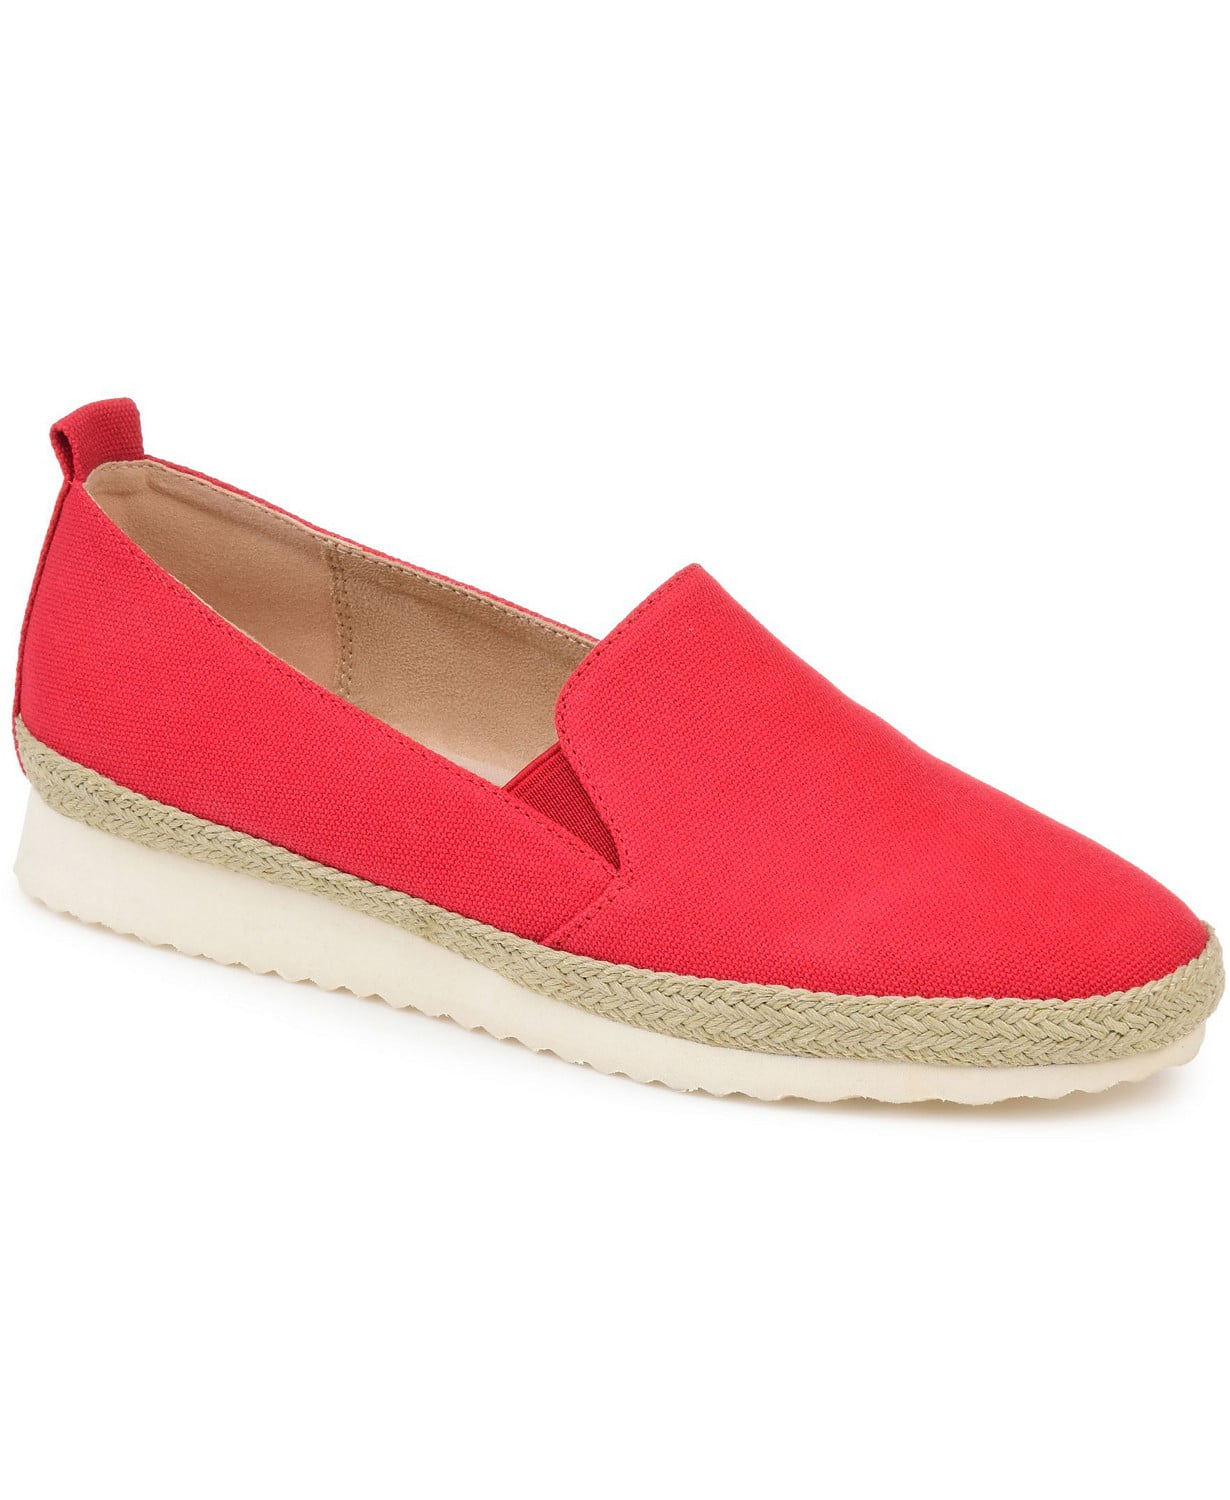 woocommerce-673321-2209615.cloudwaysapps.com-journee-collection-womens-red-leela-espadrille-flats